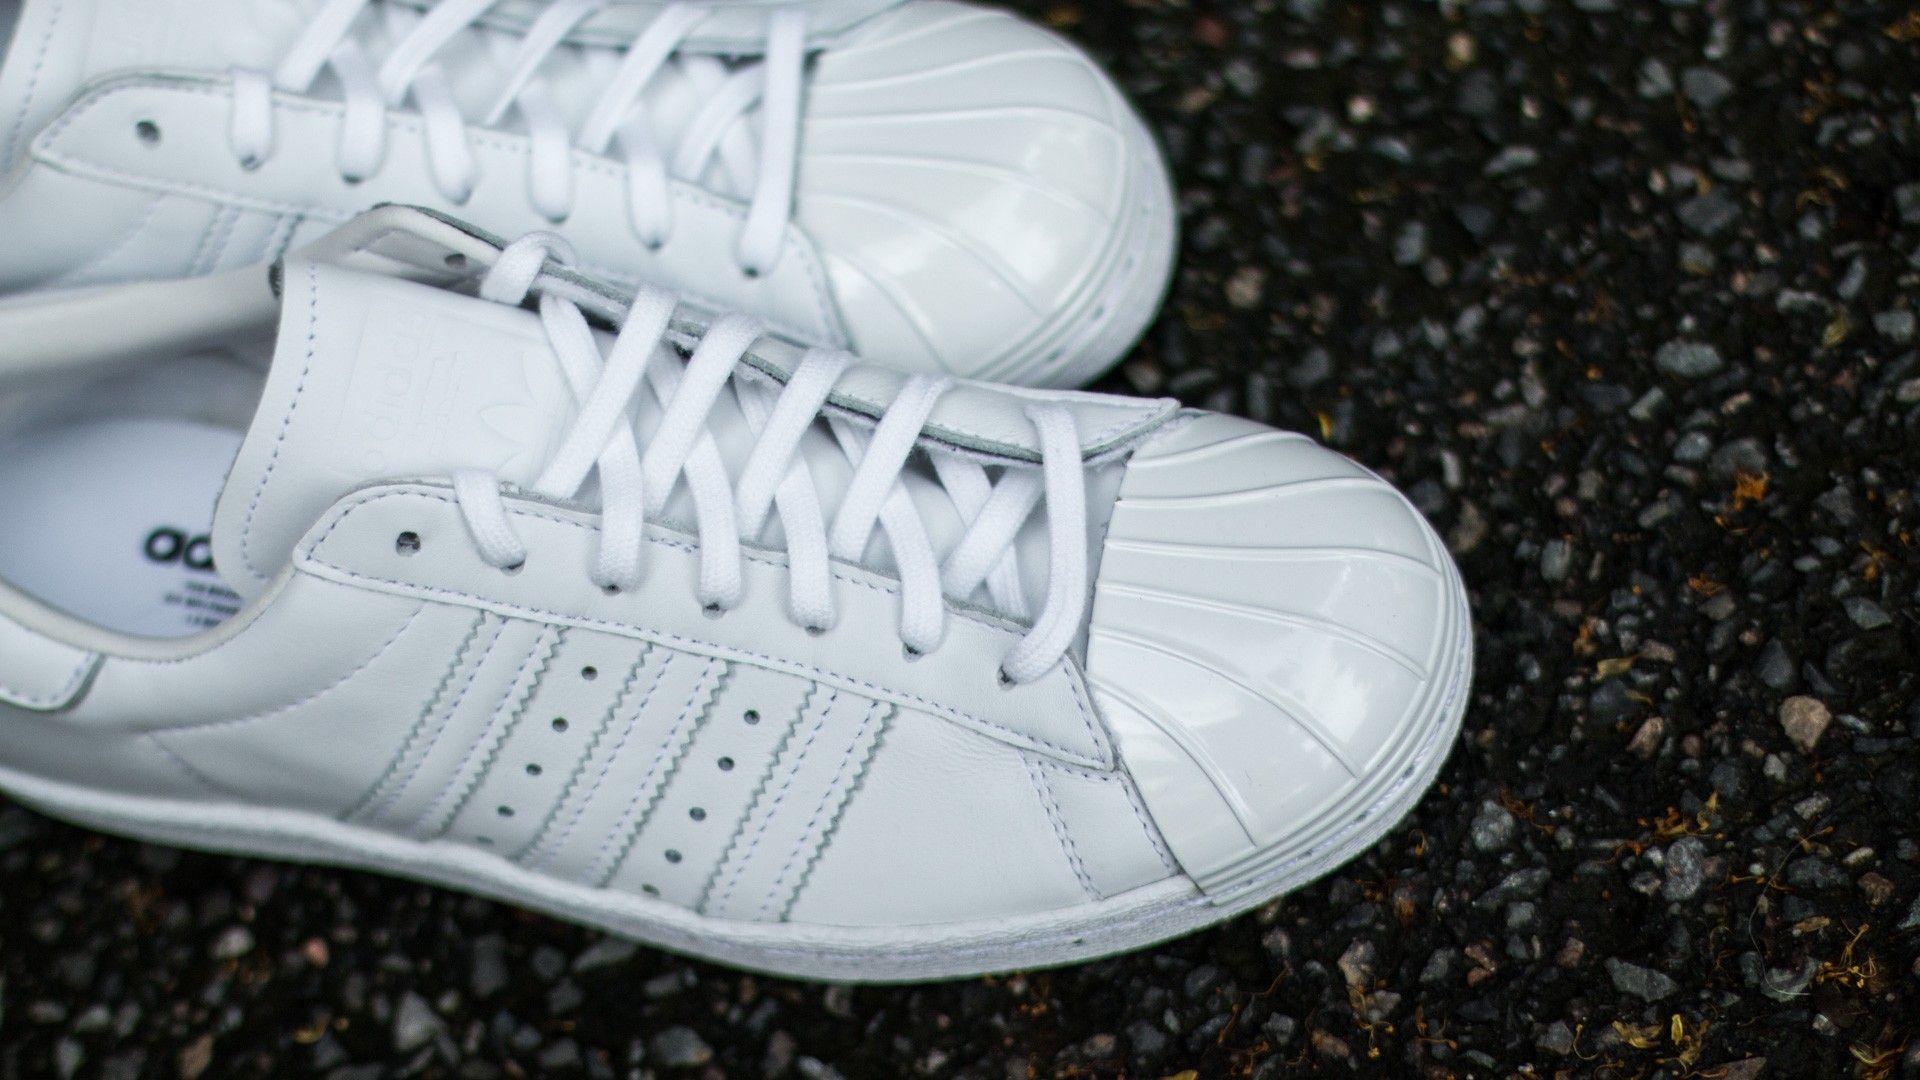 adidas Superstar 80s Metal Toe W Ftw White/ Ftw White/ Core Black